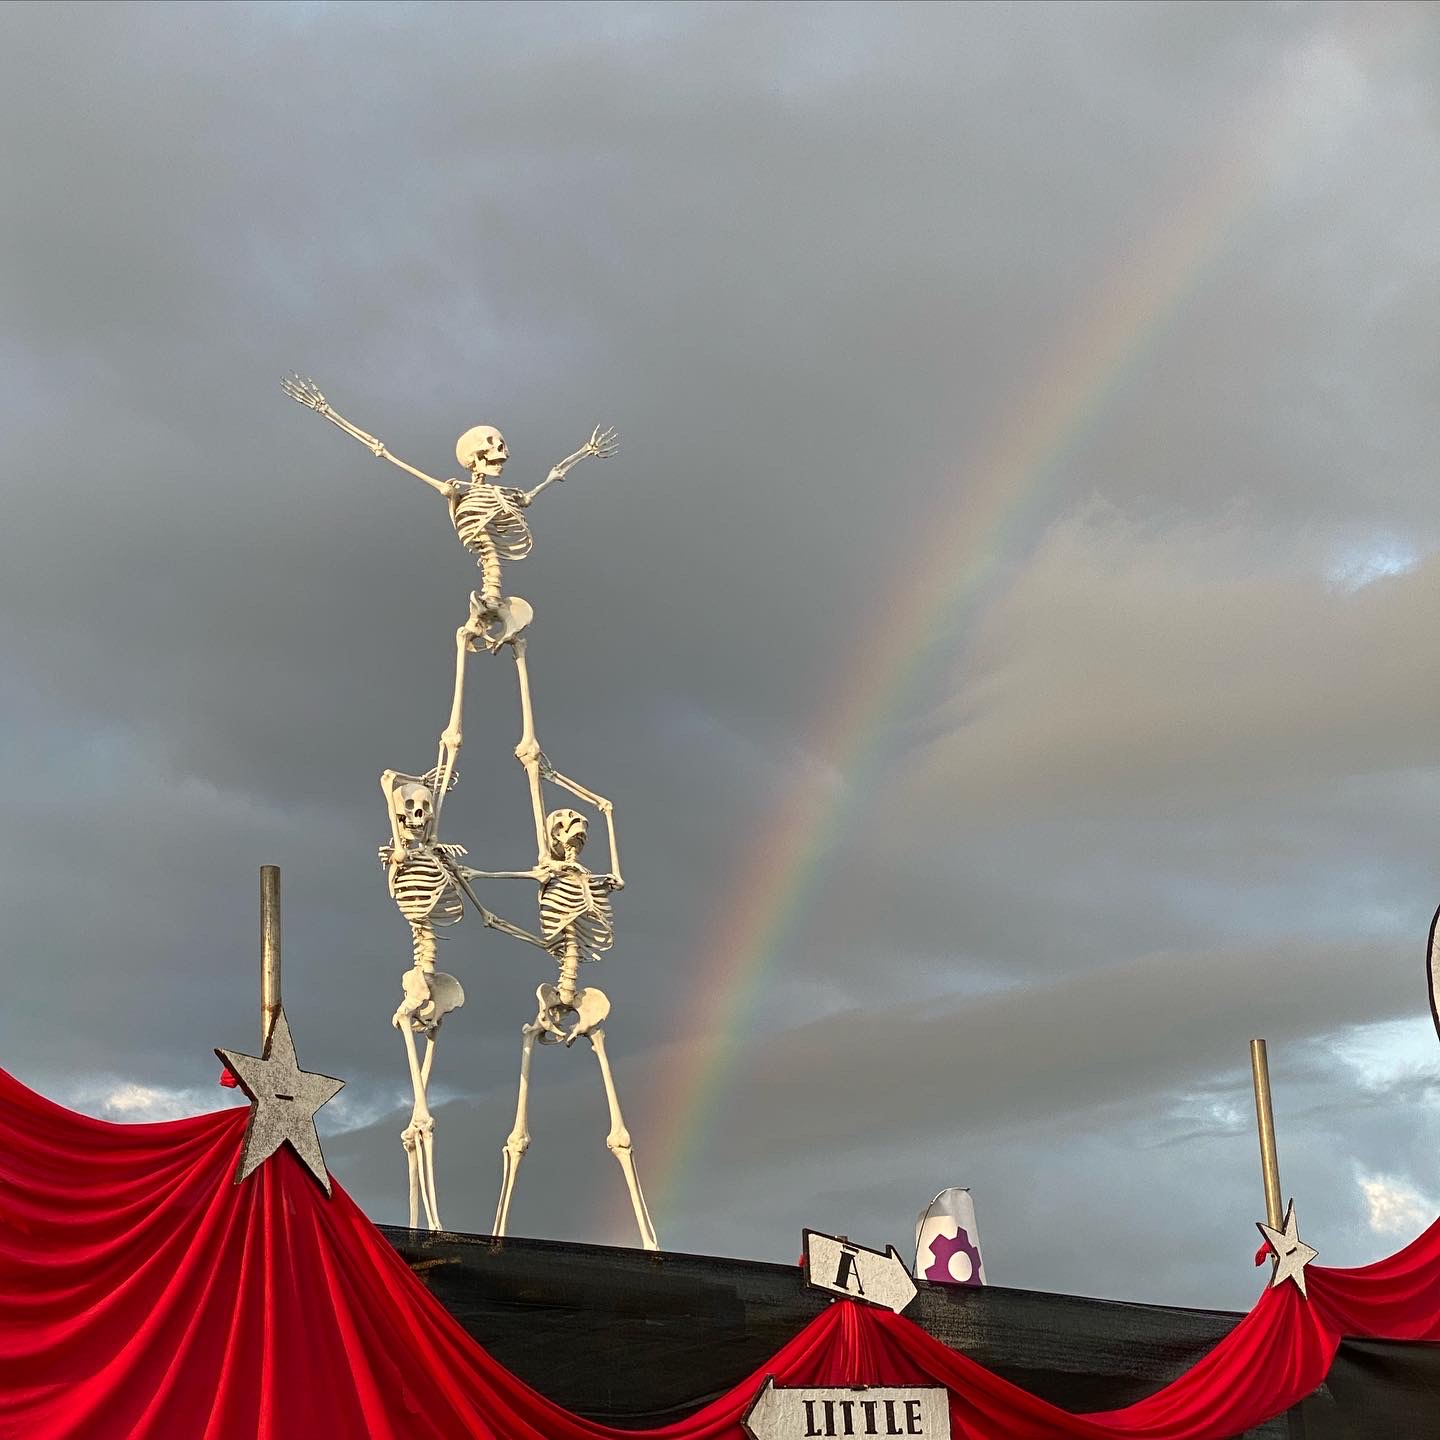 Acrobats Skeleton Sculpture by Wilfred Pritchard from The Sculpture Park at Glastonbury